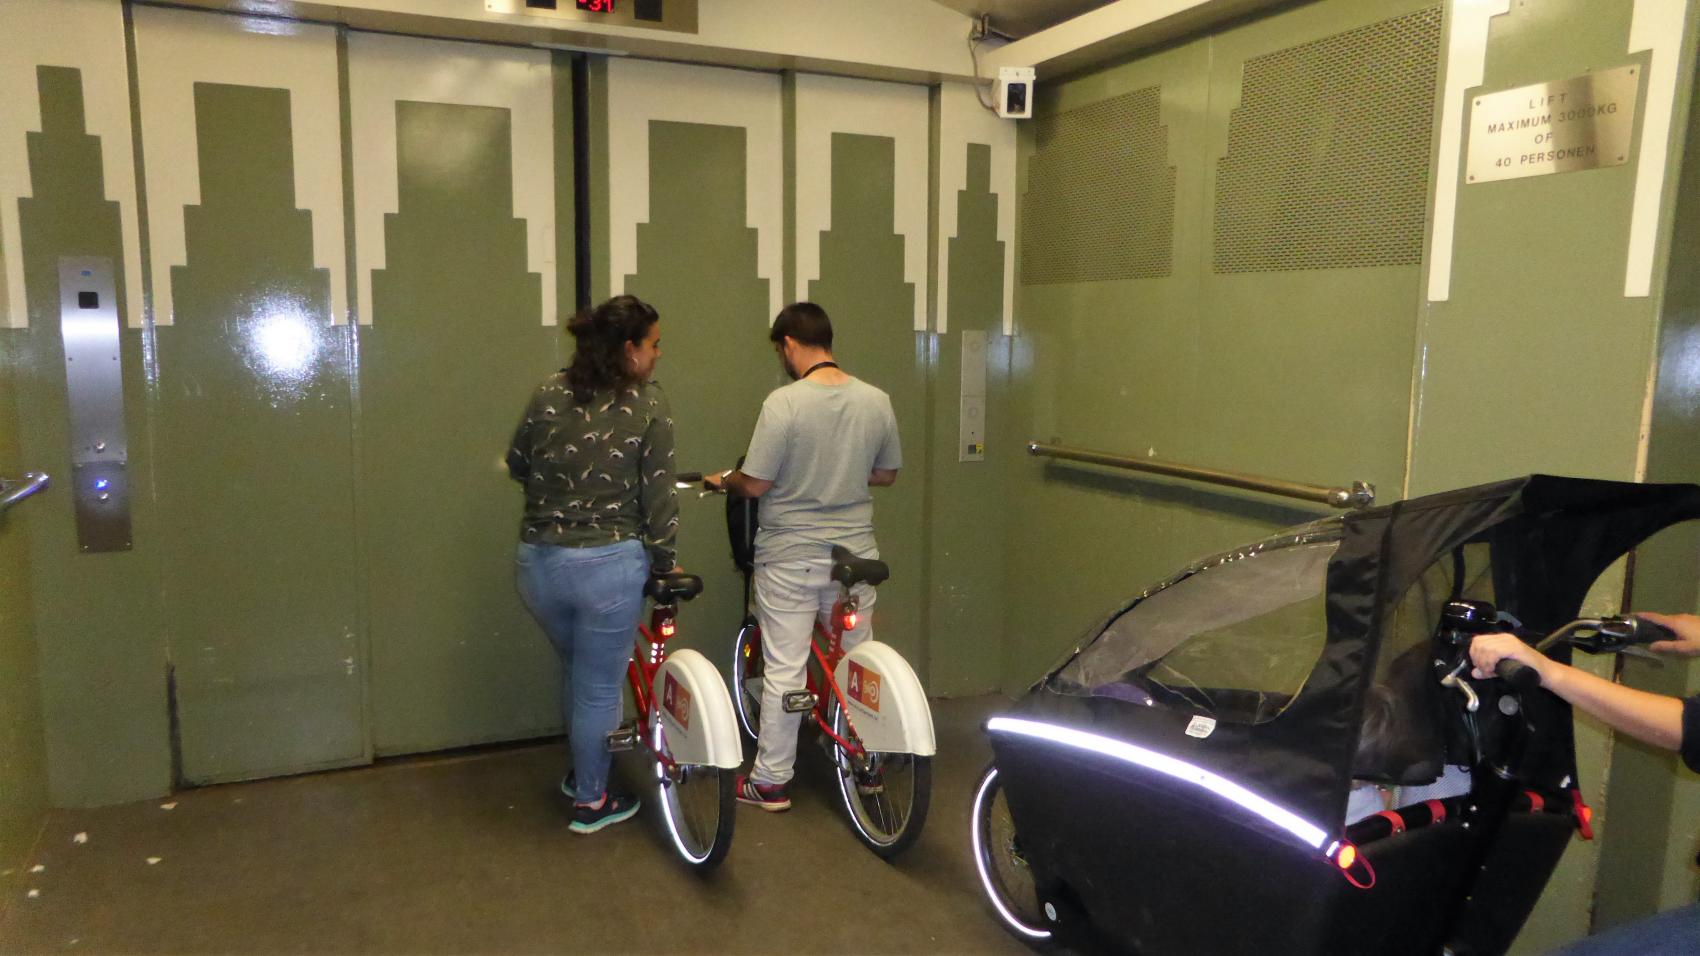 The lifts have capacity of up to 40 persons each and one can easily ride into them with cargo bikes as well.